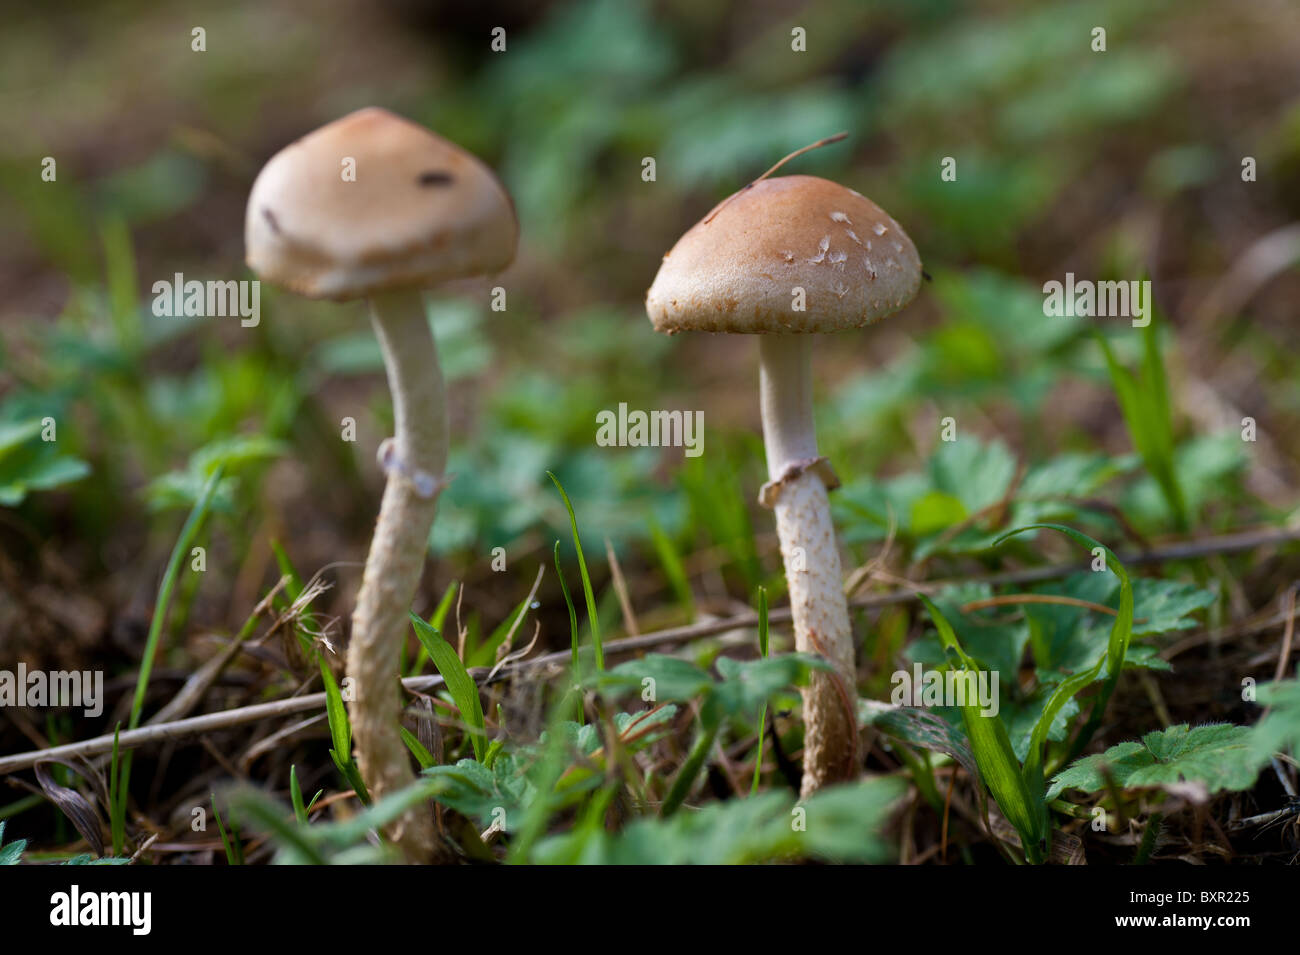 Mushrooms growing on the forest floor Stock Photo